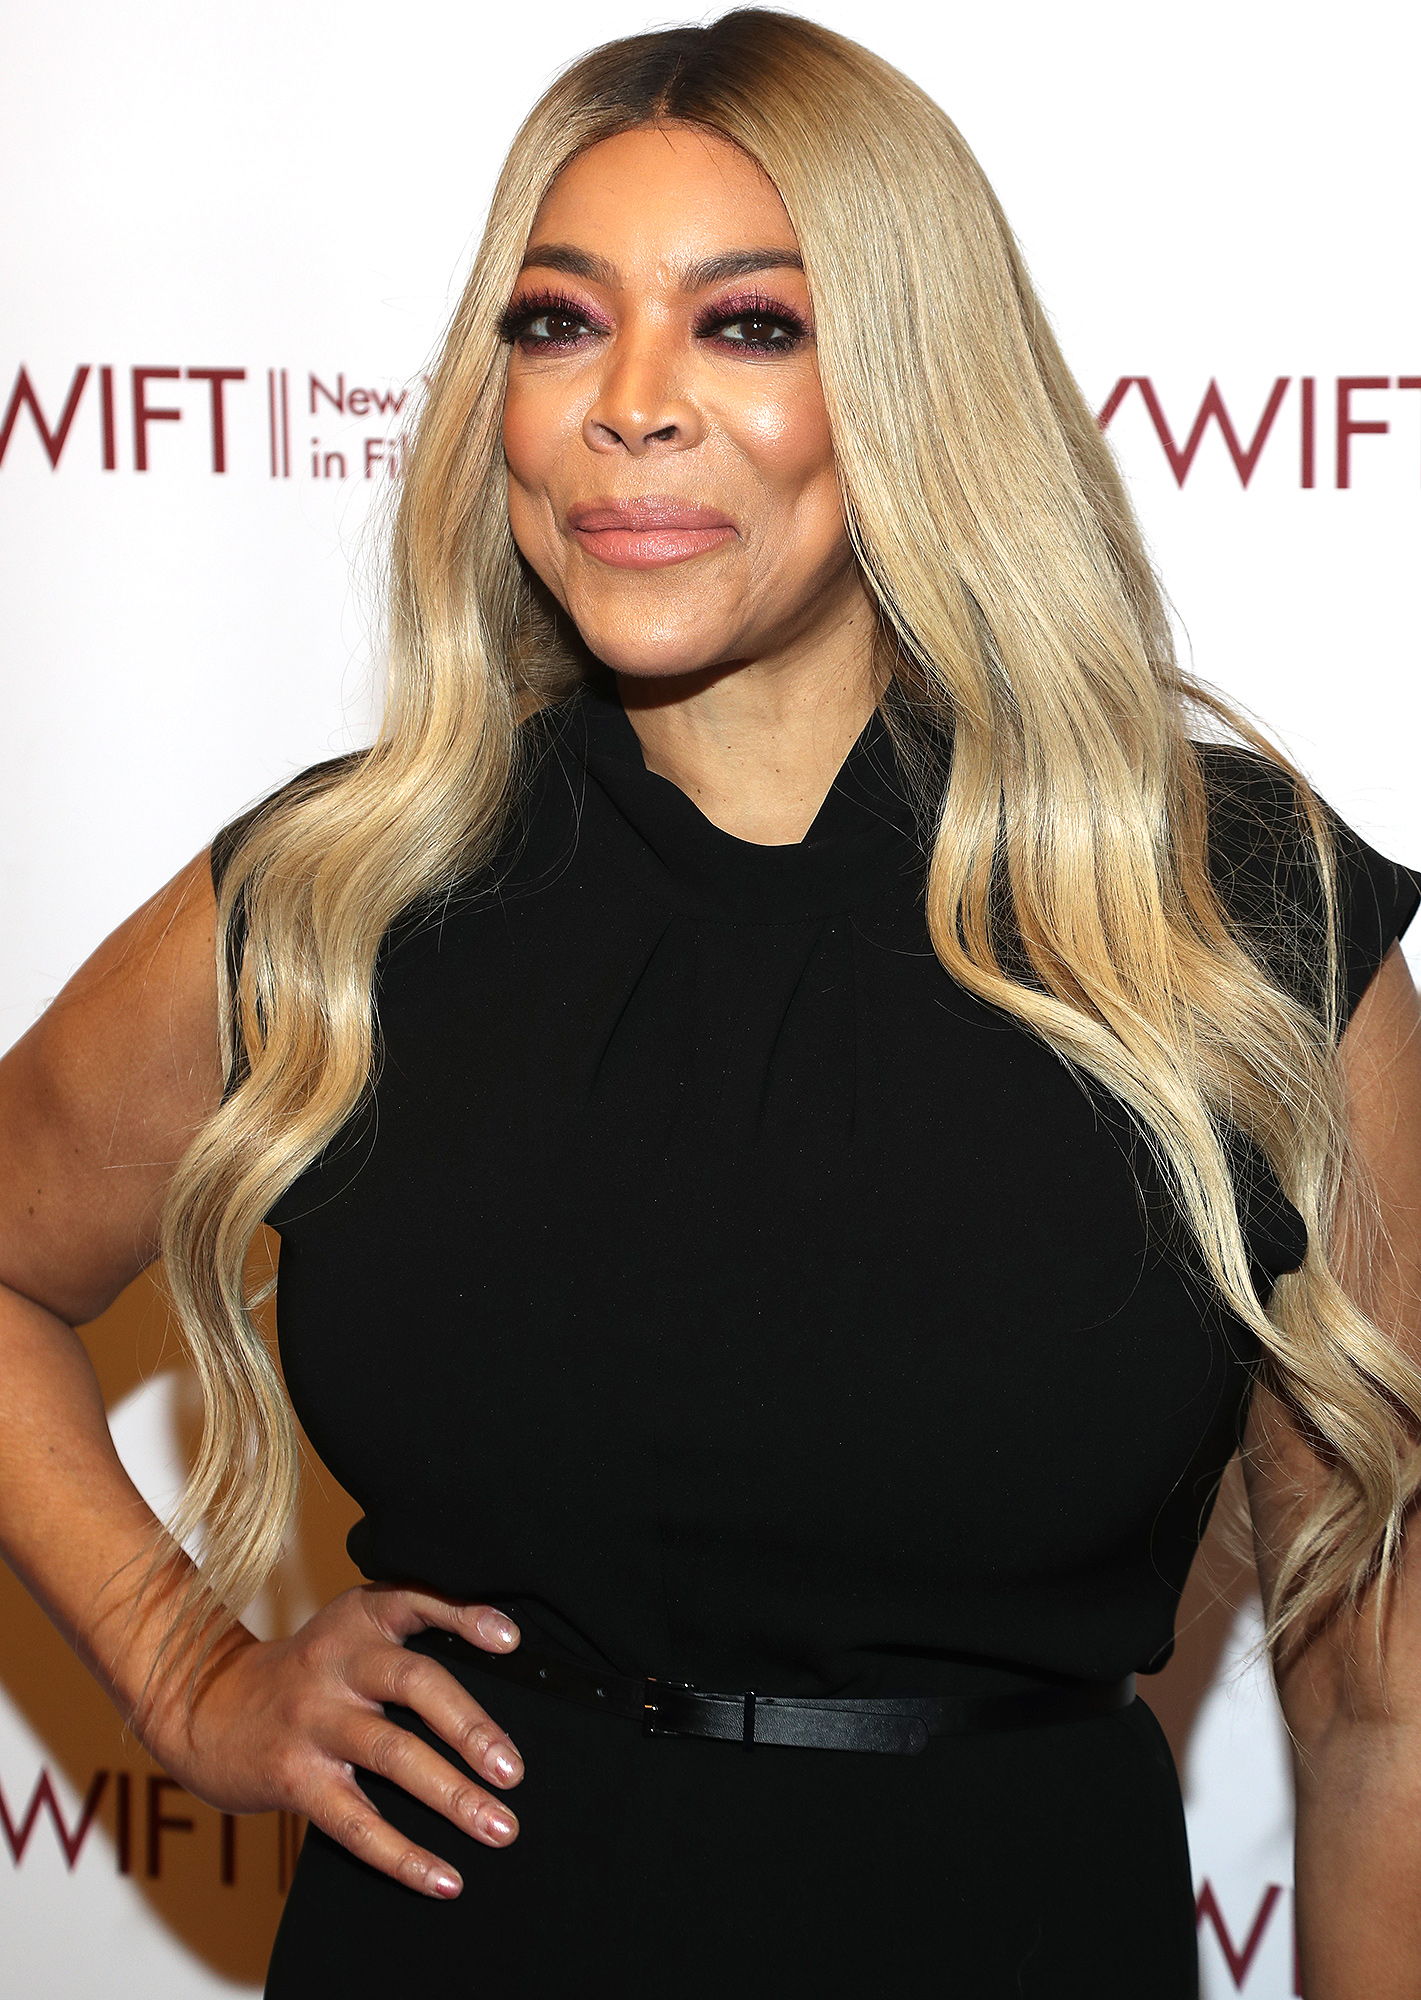 Who Is Wendy Williams? Television Host Biography, Networth And Social